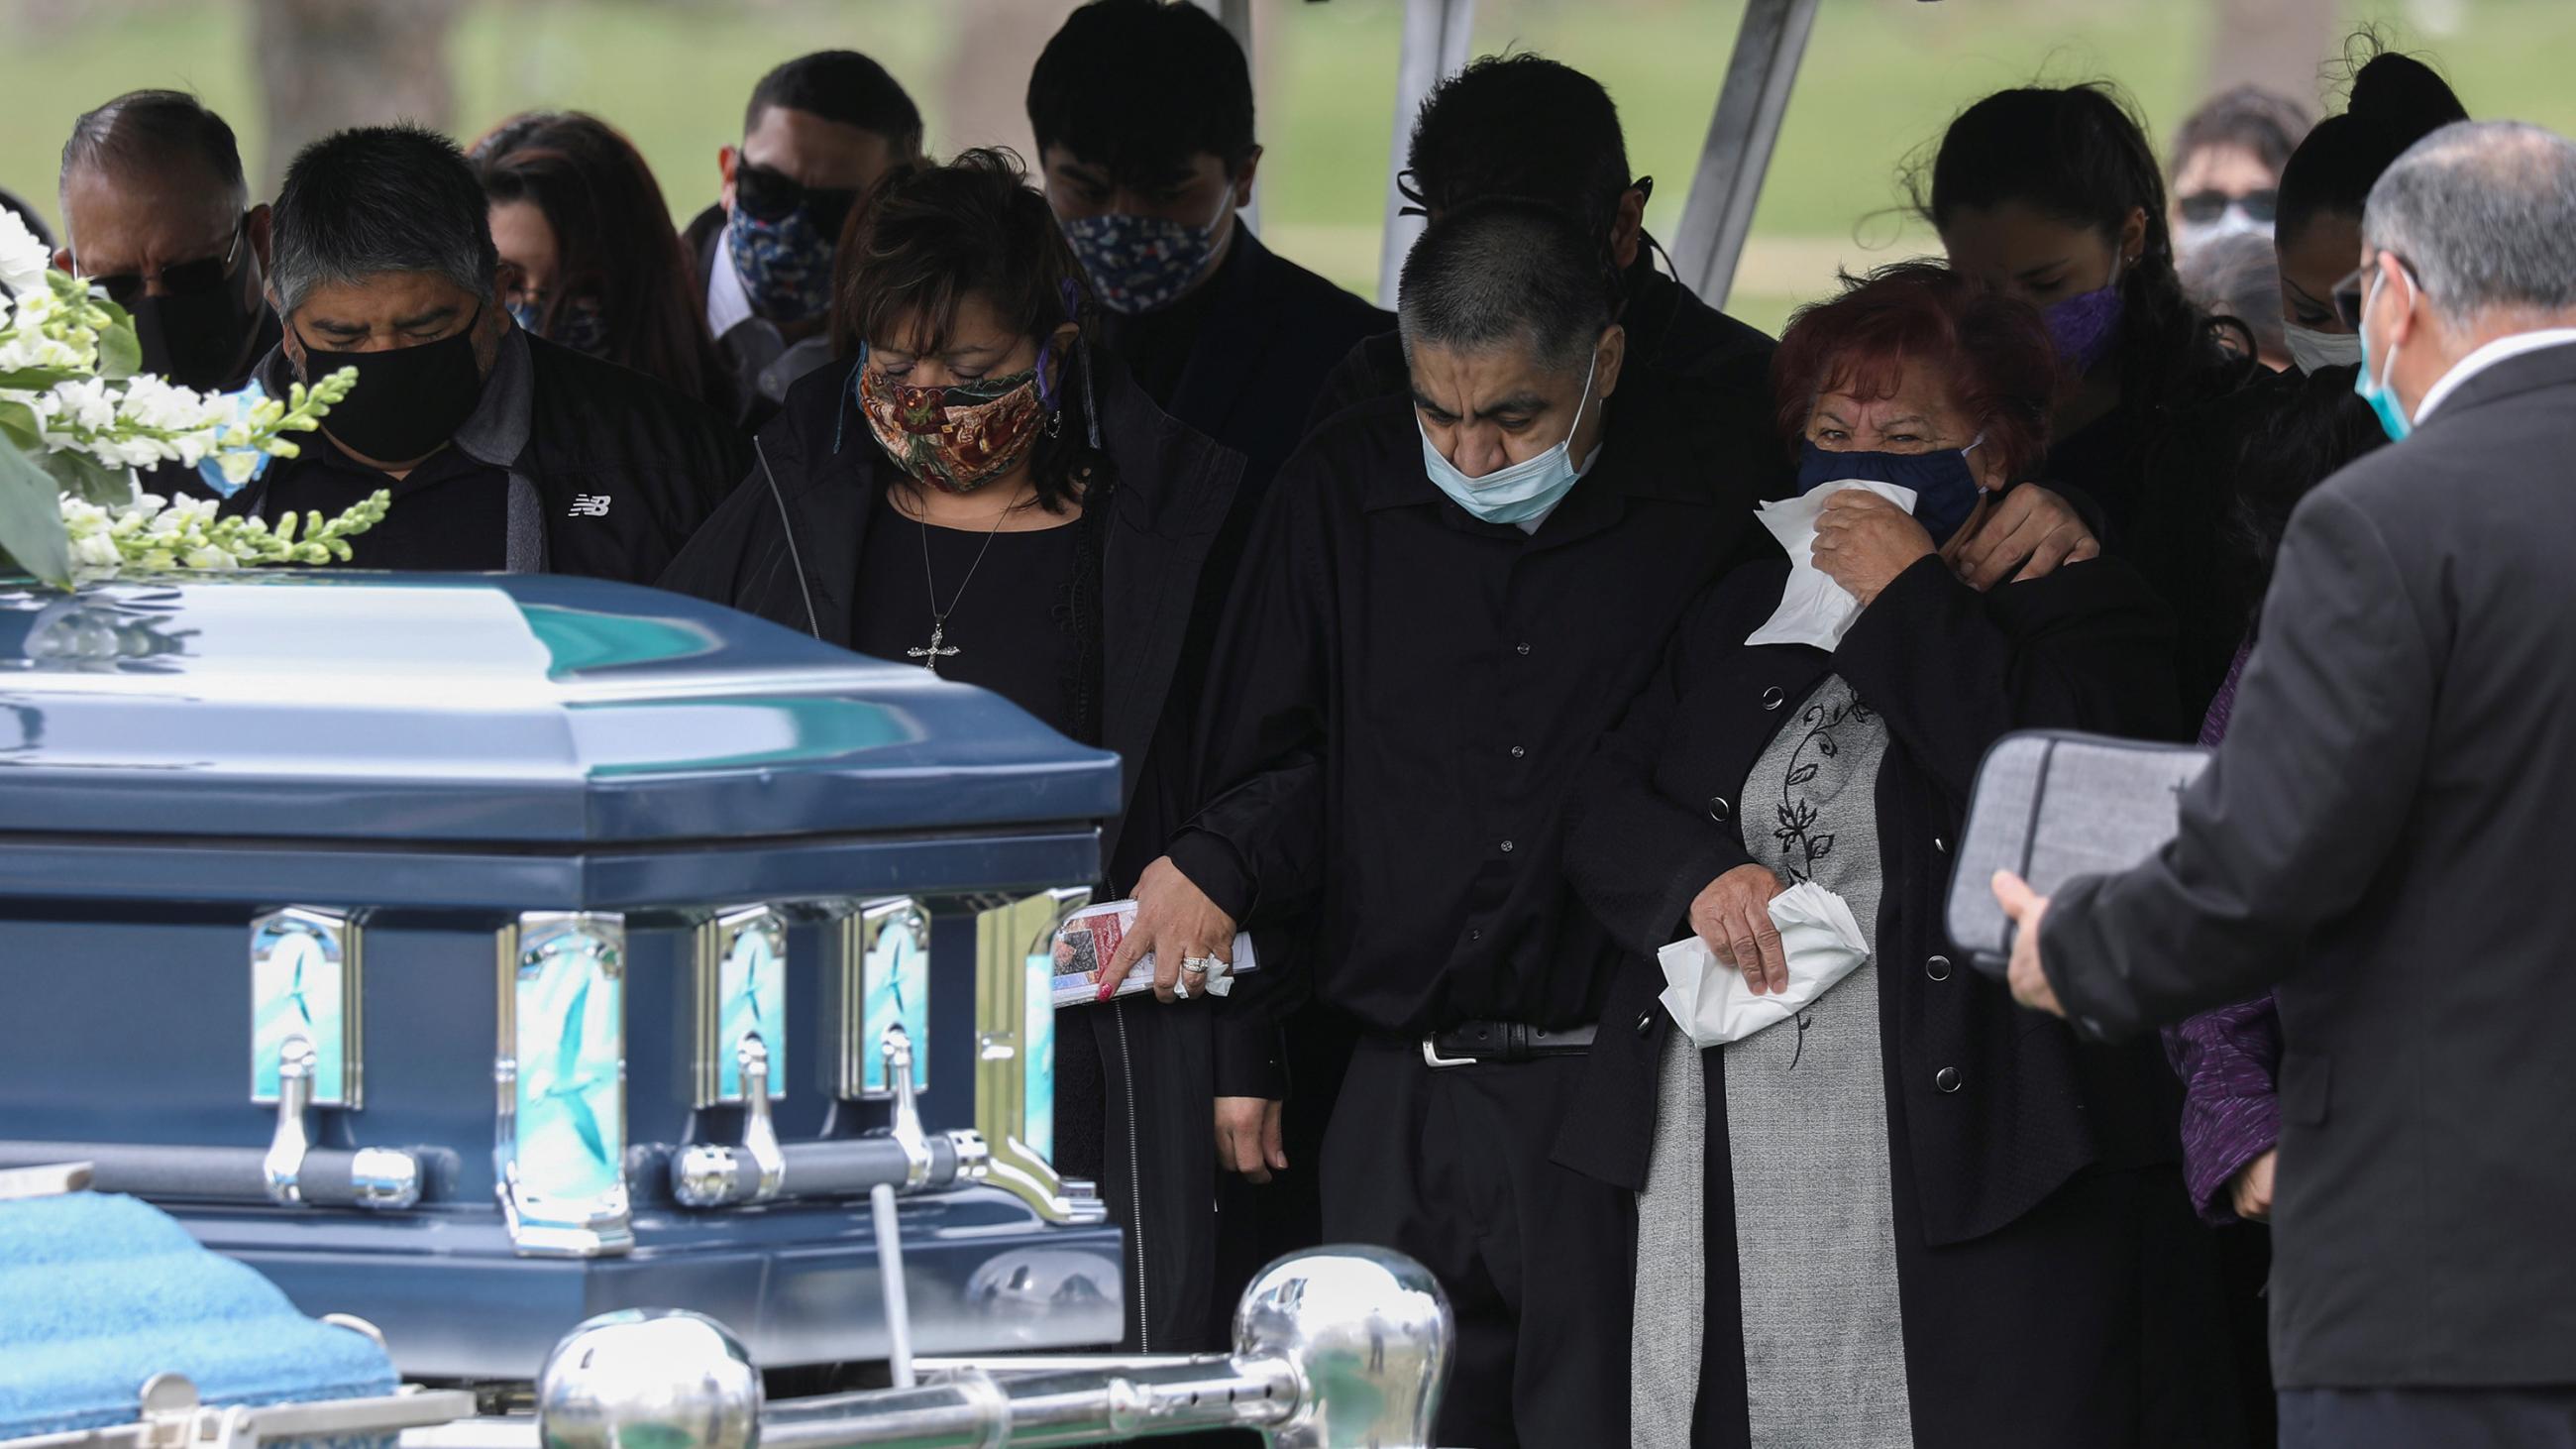 The photo shows a funeral with numerous people weeping for their lost loved one. A casket stands close to the camera, ready to be lowered into the ground. 